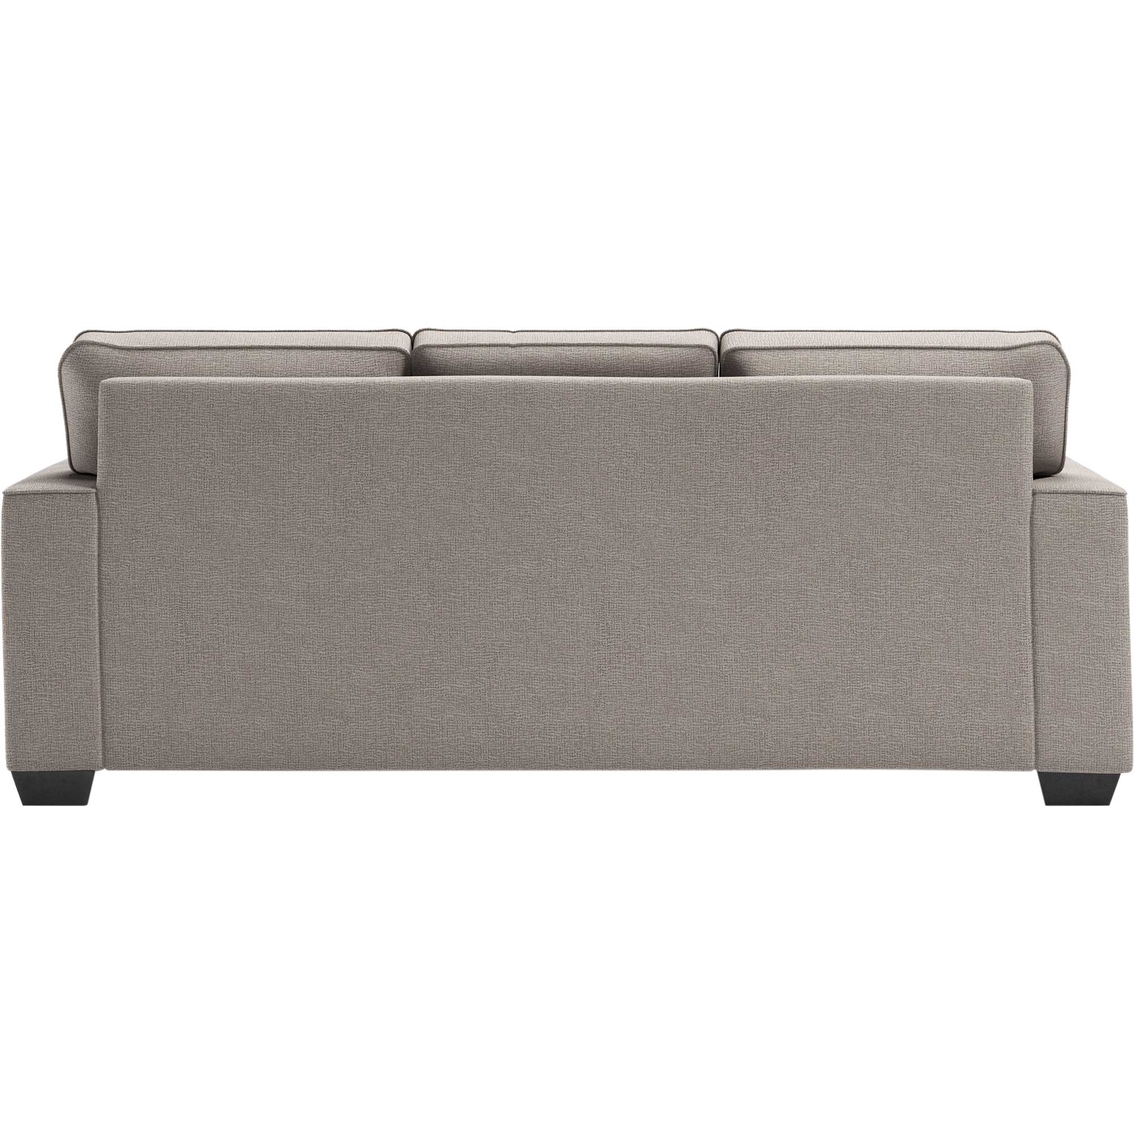 Signature Design by Ashley Greaves Sofa Chaise - Image 3 of 5